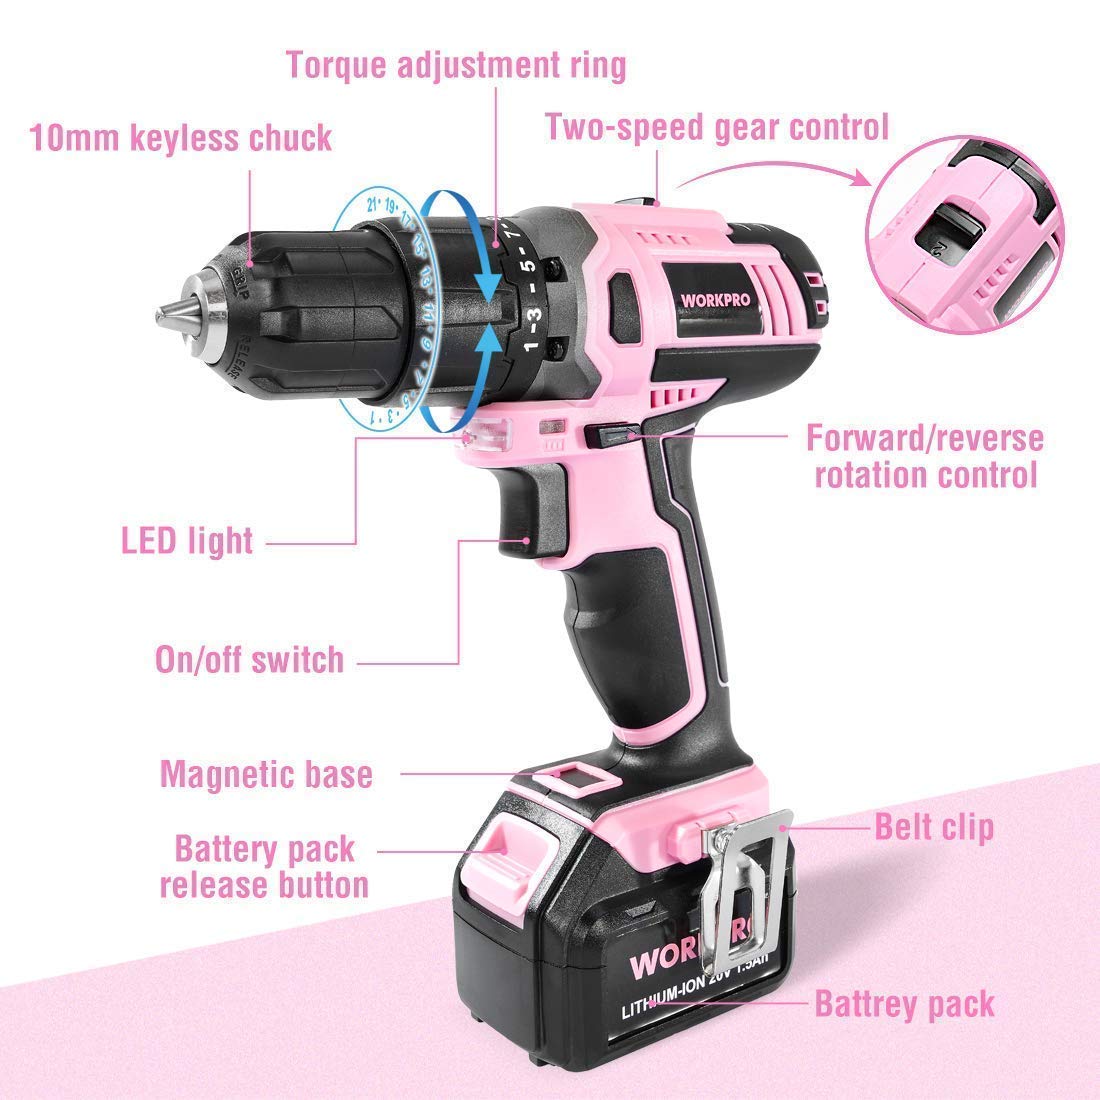 WORKPRO Pink Cordless 20V Lithium-ion Drill Driver Set (1.5Ah), 1 Battery, Charger and Storage Bag Included and Spare Charger for Replacement